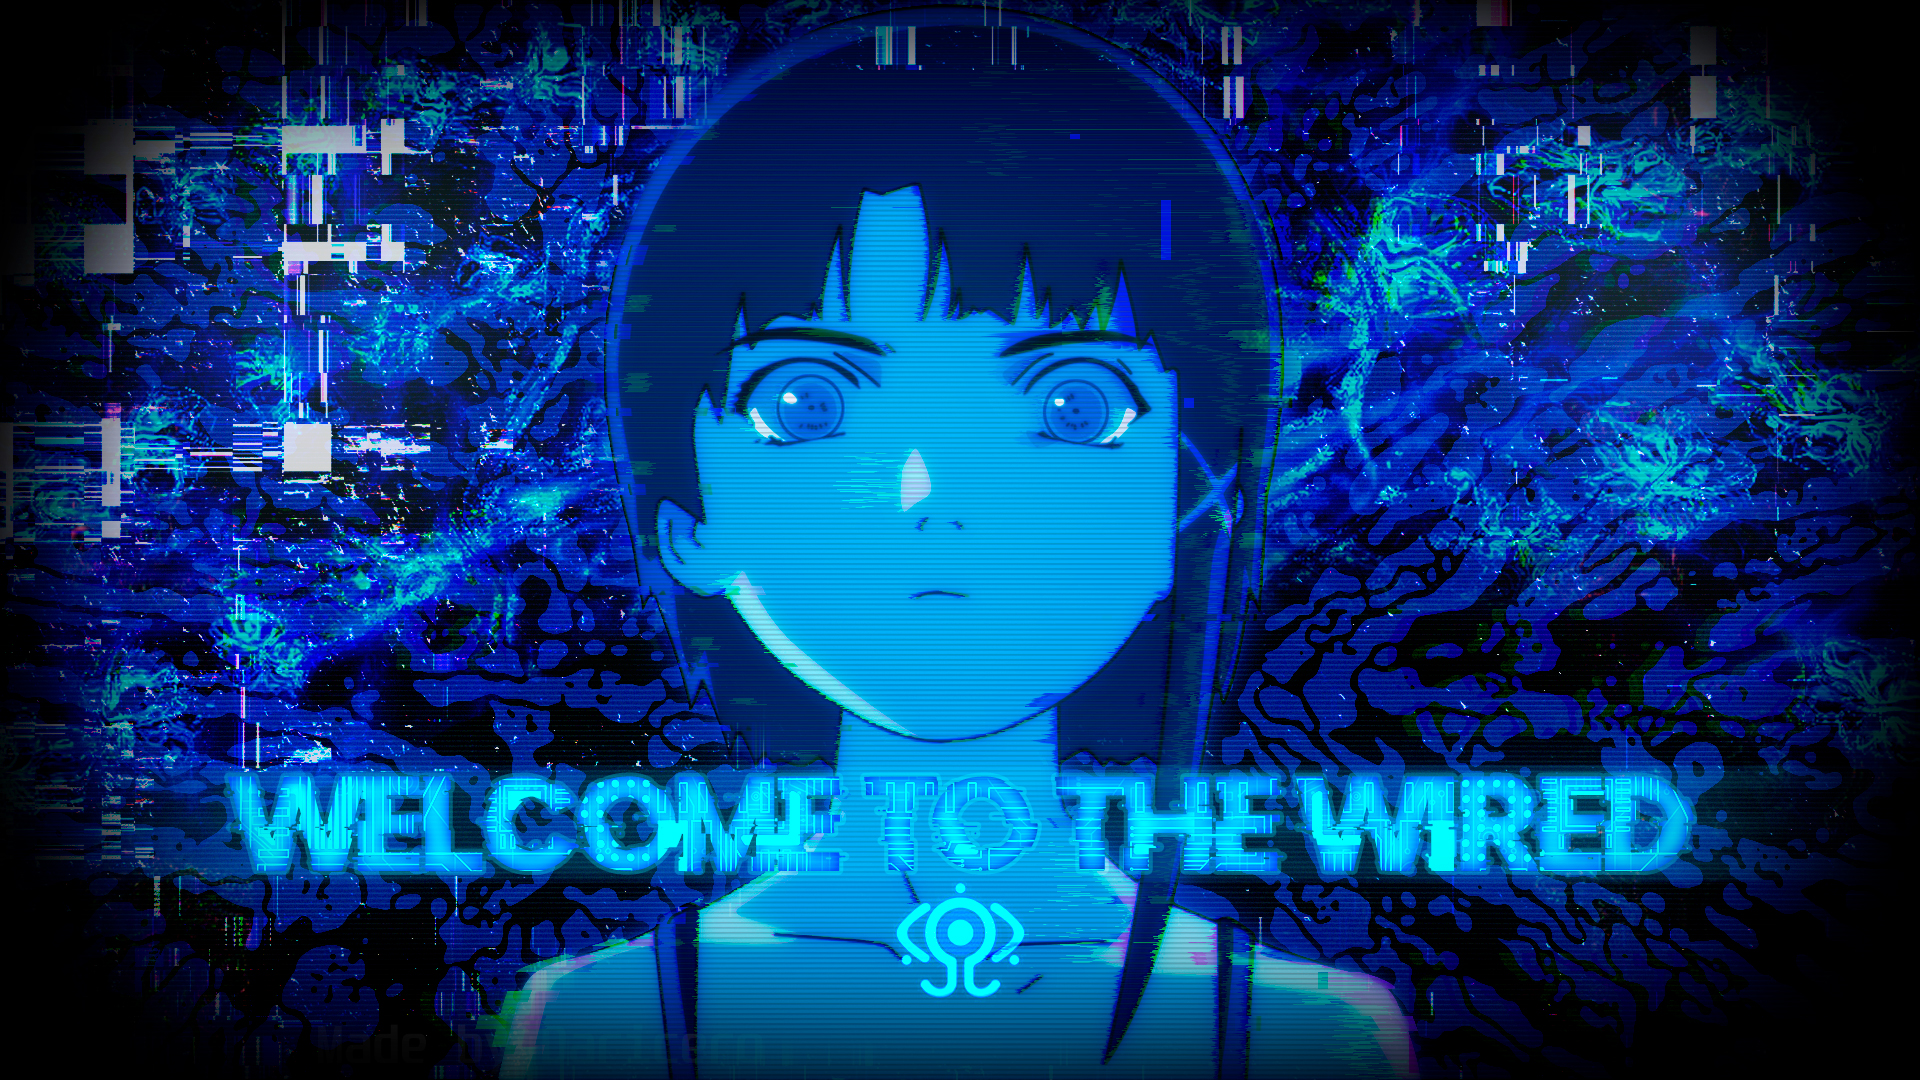 Serial Experiments Lain Lain Iwakura Glitch Art Noise Looking At Viewer Text Circuit Blue Anime Girl 1920x1080